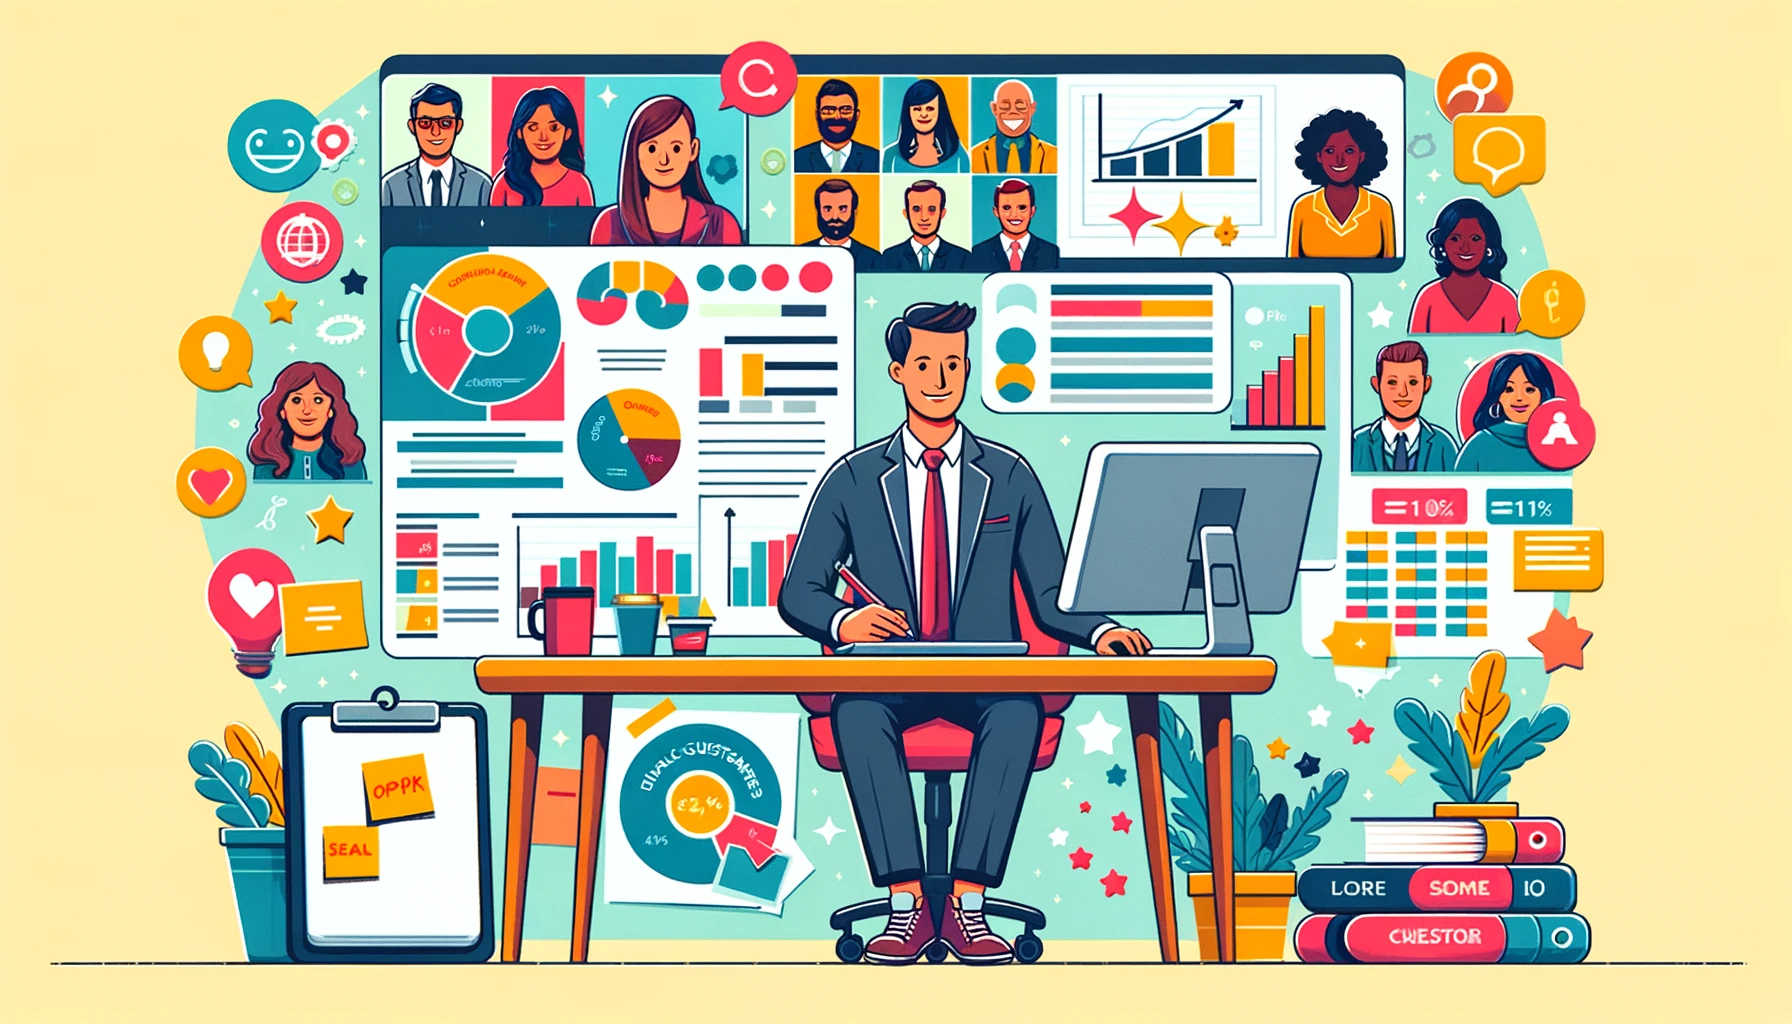 An illustration of a small business owner analyzing customer data to identify ideal customers. The background features diverse customer avatars representing different demographics, interests, and behaviors, highlighting community-driven branding and community engagement.